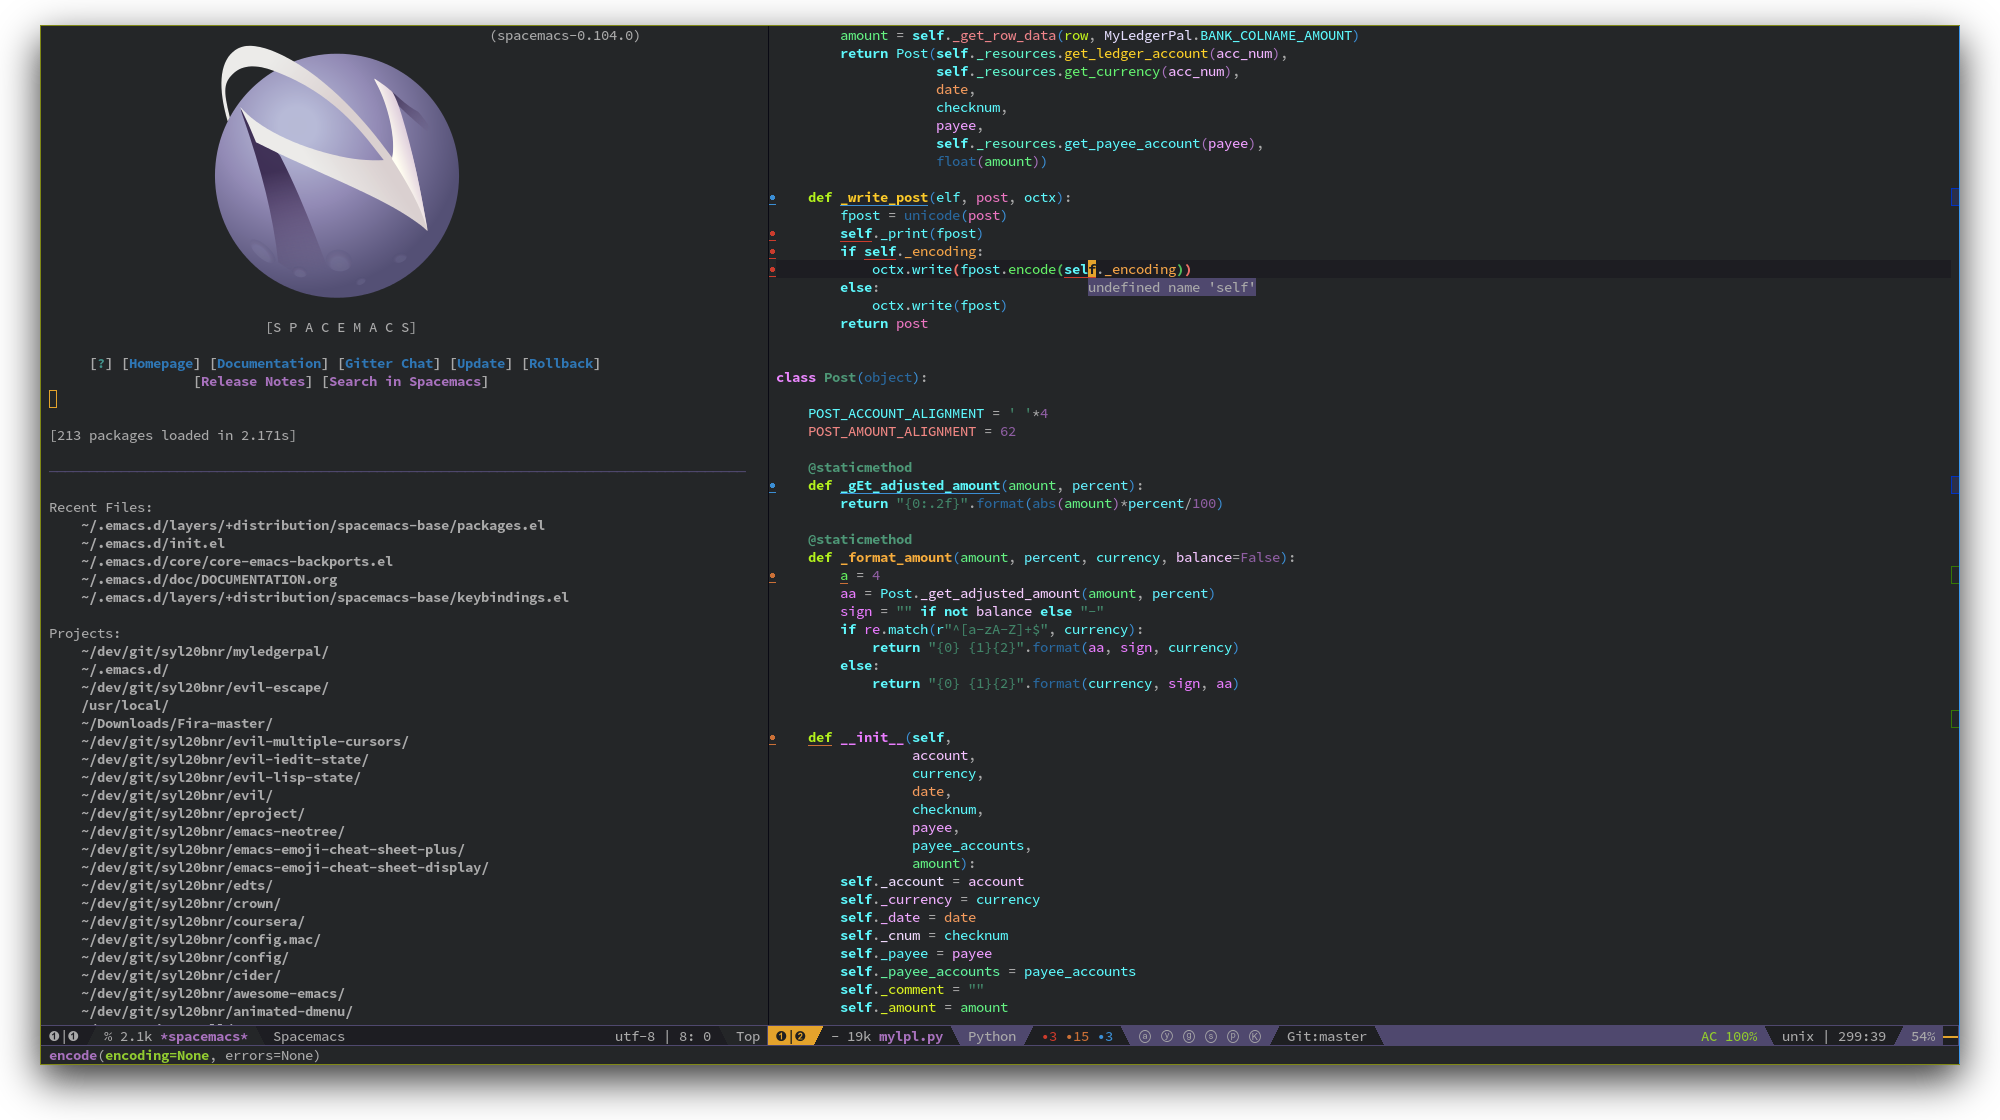 /TakeV/spacemacs/media/commit/91947406f8901c19a38db174f3704c5d66bf6de1/doc/img/spacemacs-python.png